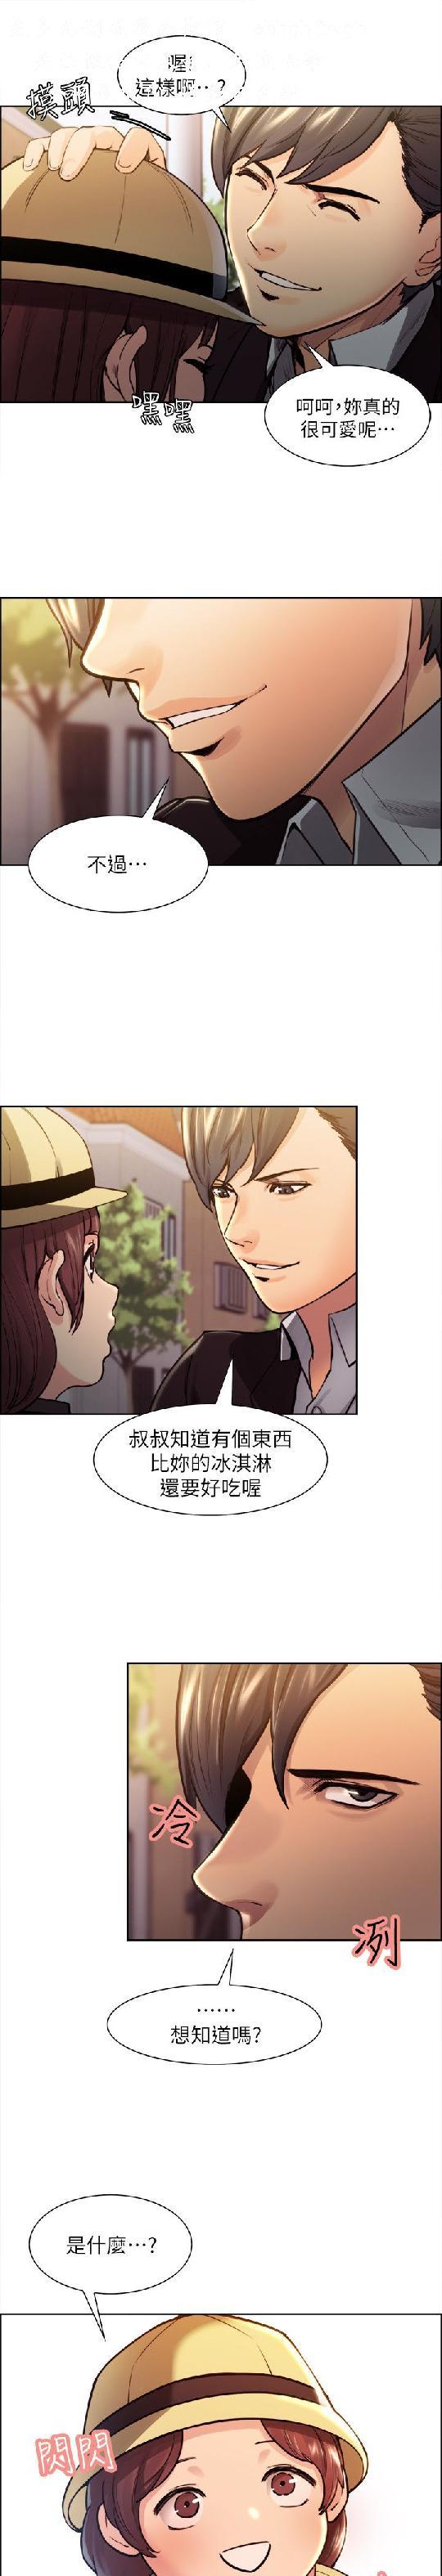 Blow Job 奪愛的滋味【中文】 First Time - Page 10